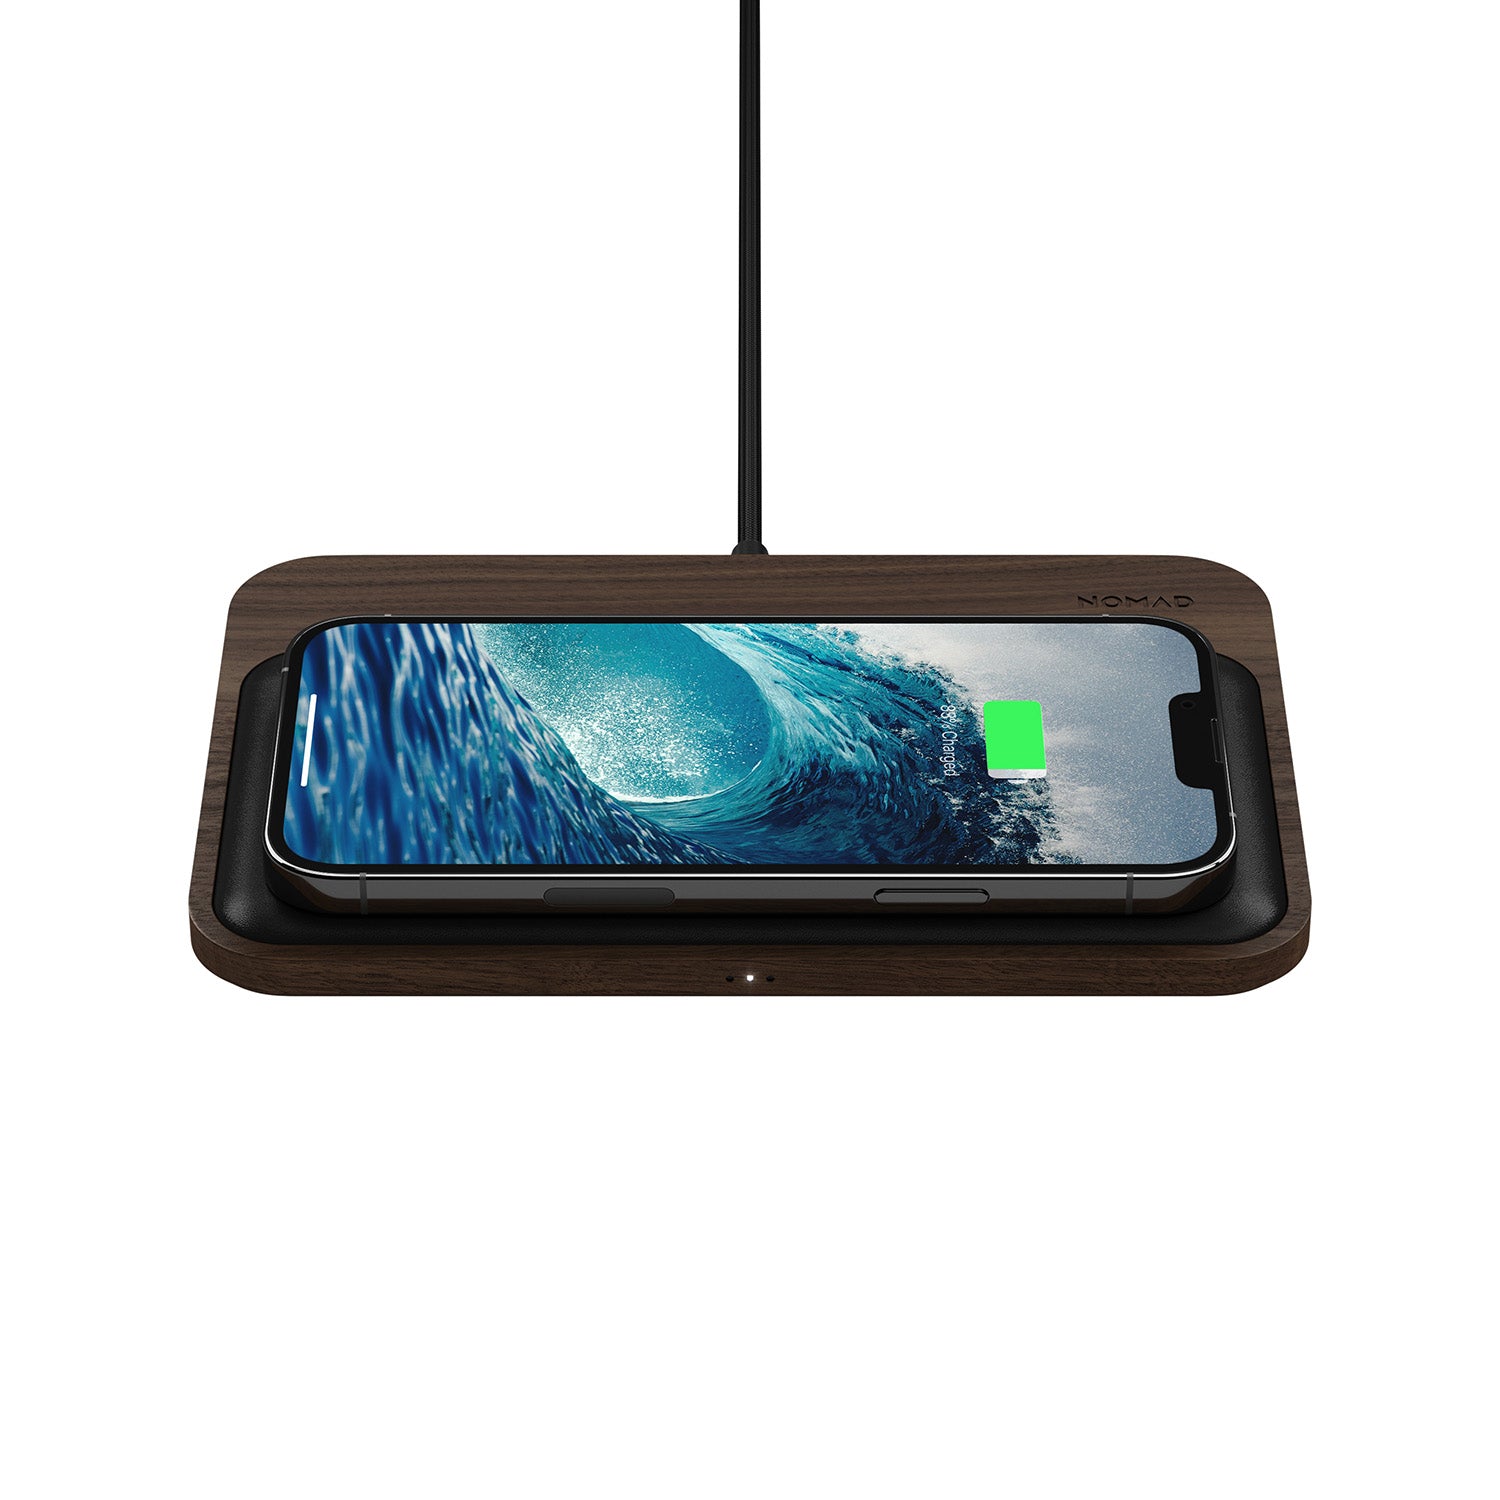 NOMAD Base Station Horween Leather Charging Pad Hub Edition with Mag Alignment Wireless Charging Pad NOMAD 